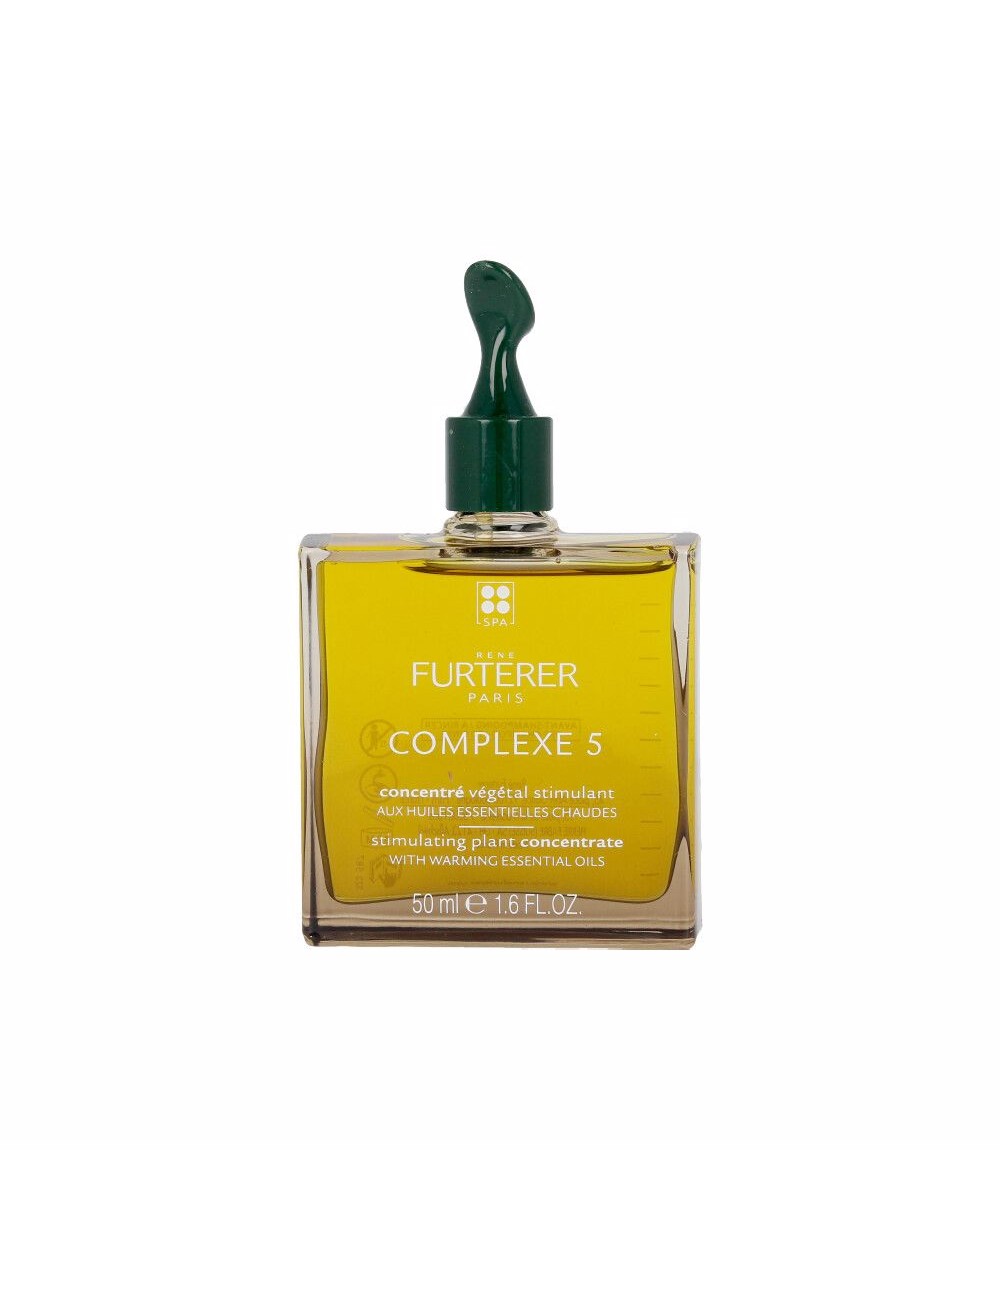 COMPLEXE 5 stimulating plant extract pre-shampoo 50ml